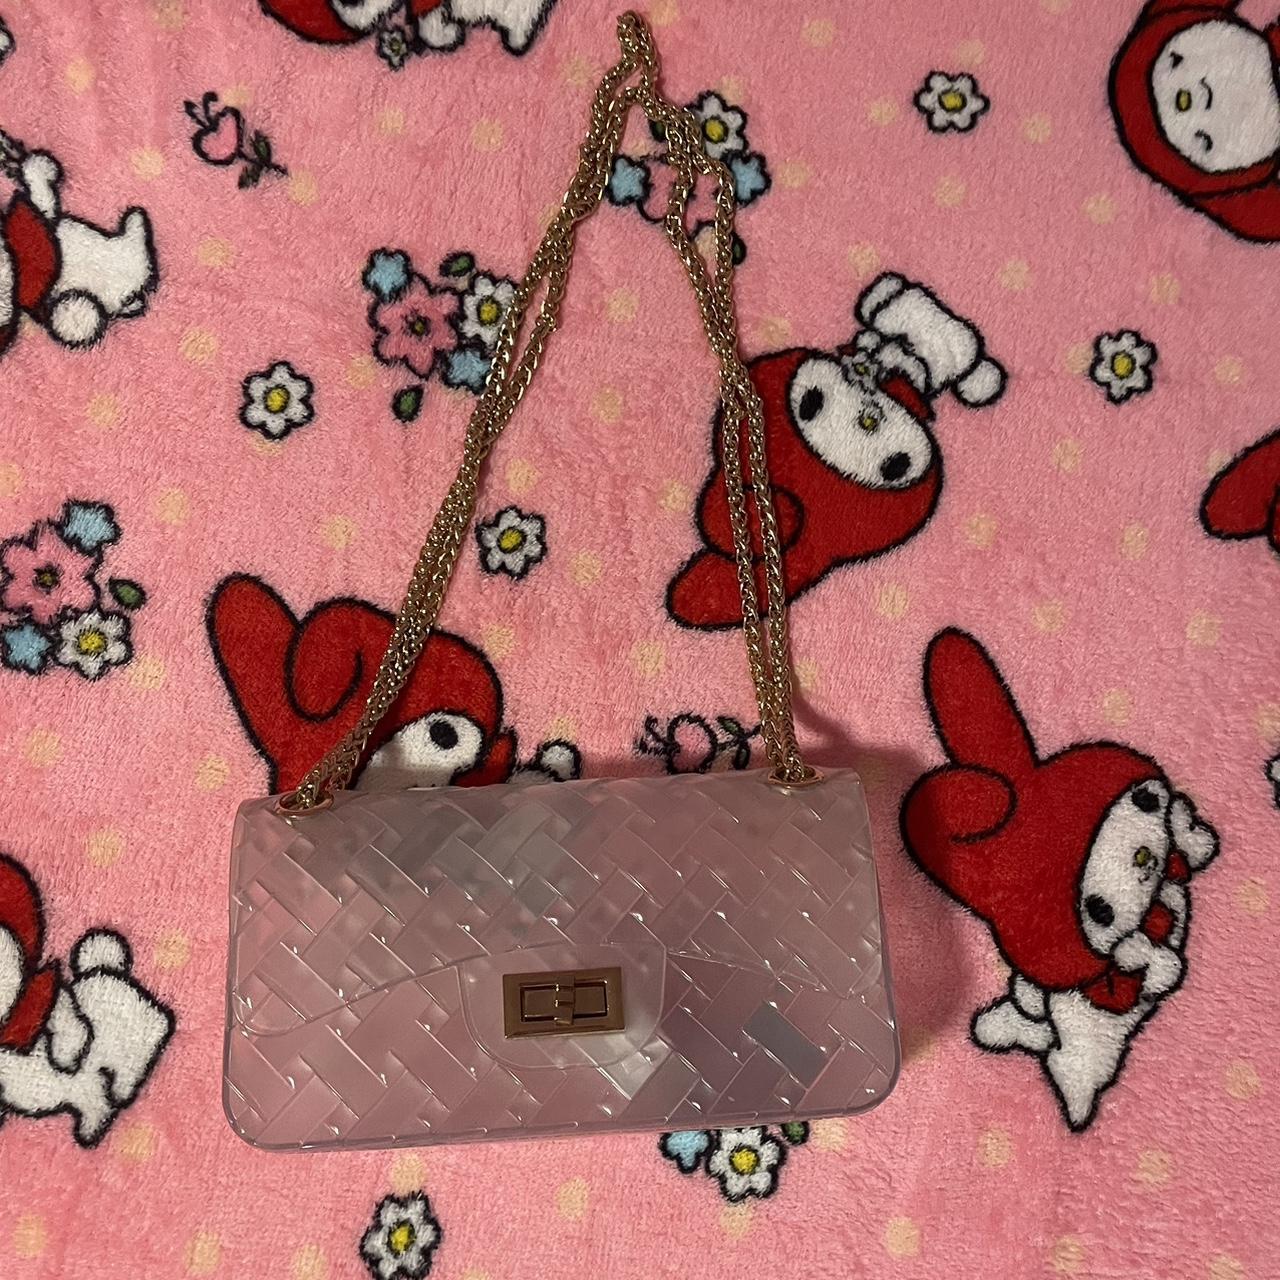 Forever 21 Clear Purse - $13 - From Emma